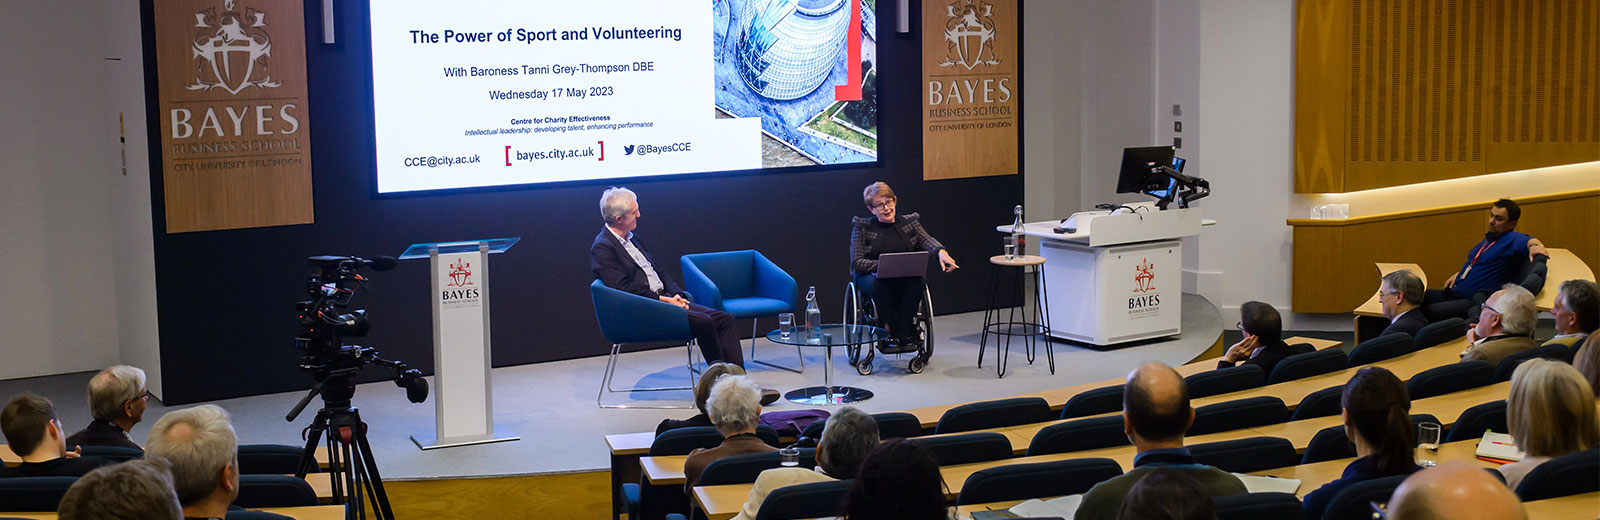 Dr Justin Davis Smith, Baroness Tanni Grey-Thompson and Alex Skailes at the CCE Charity Talk 'The power of sport and volunteering' event'